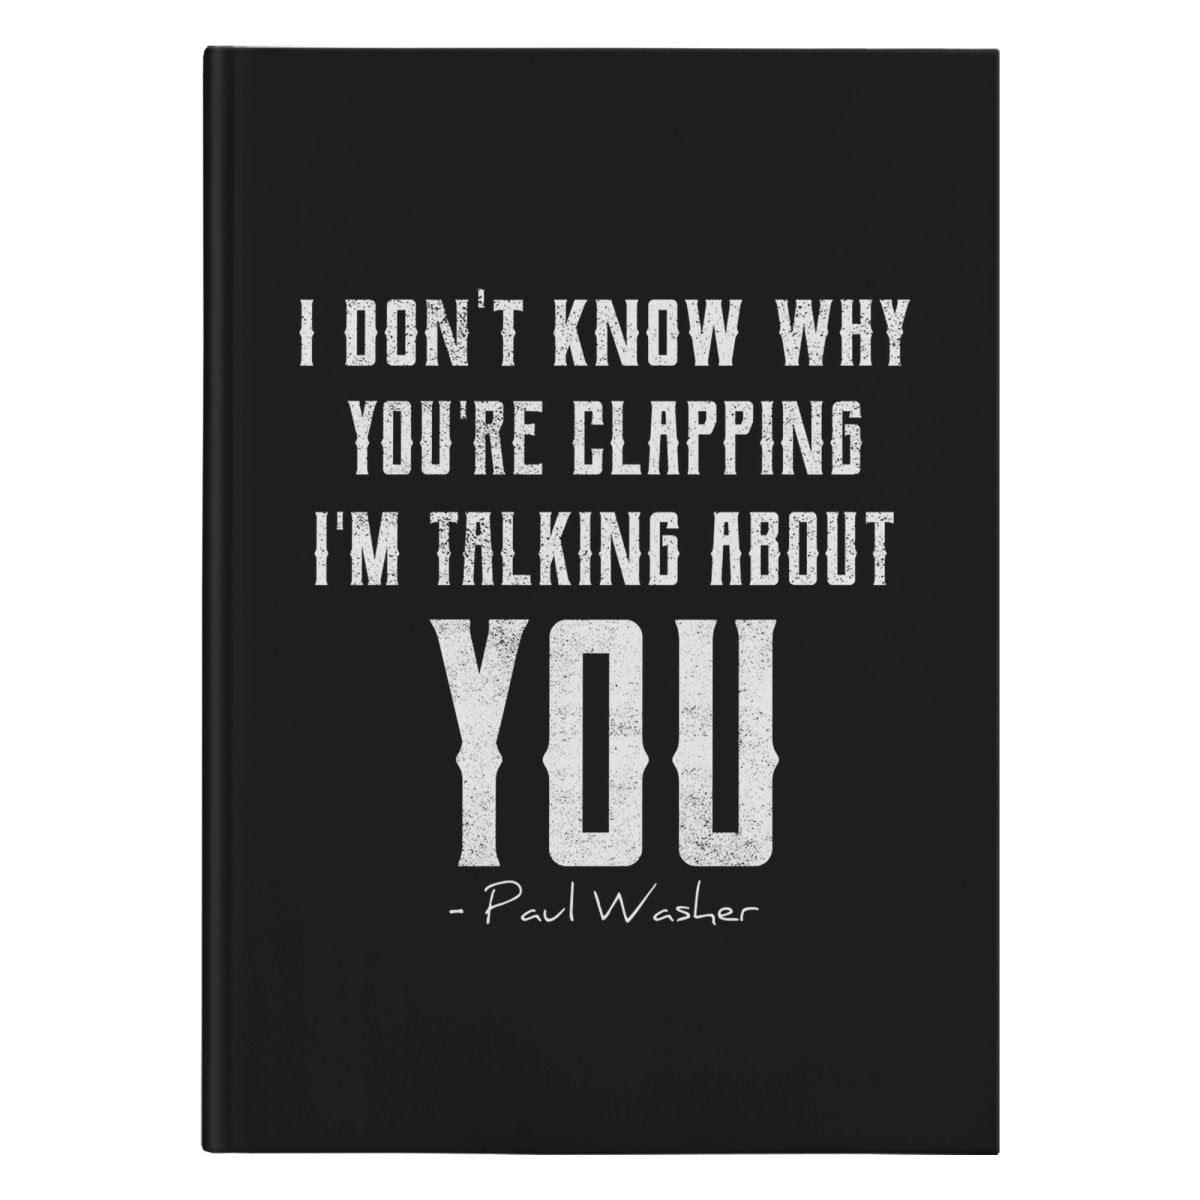 I Don't Know Why You're Clapping (150 page Hardcover Journal) - SDG Clothing